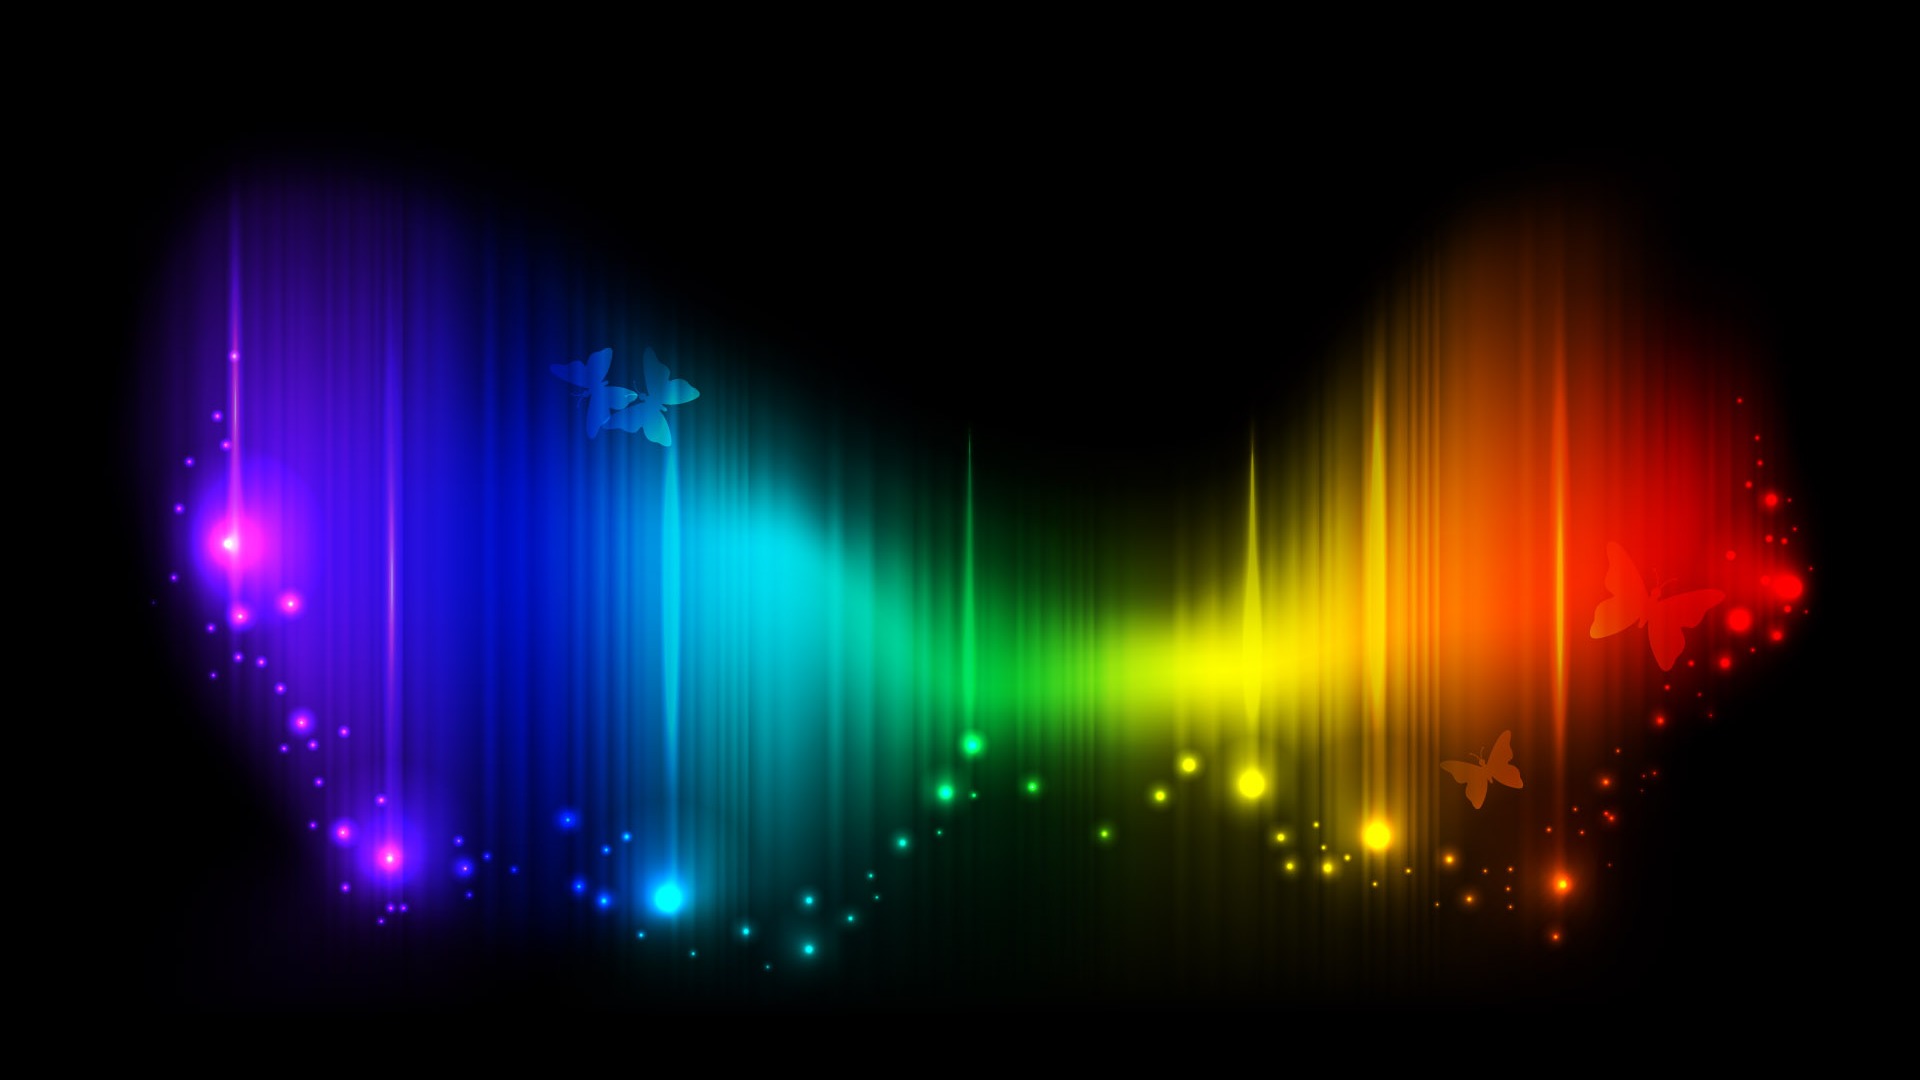 By Stephen Ments Off On Amazing Colorful HD Wallpaper